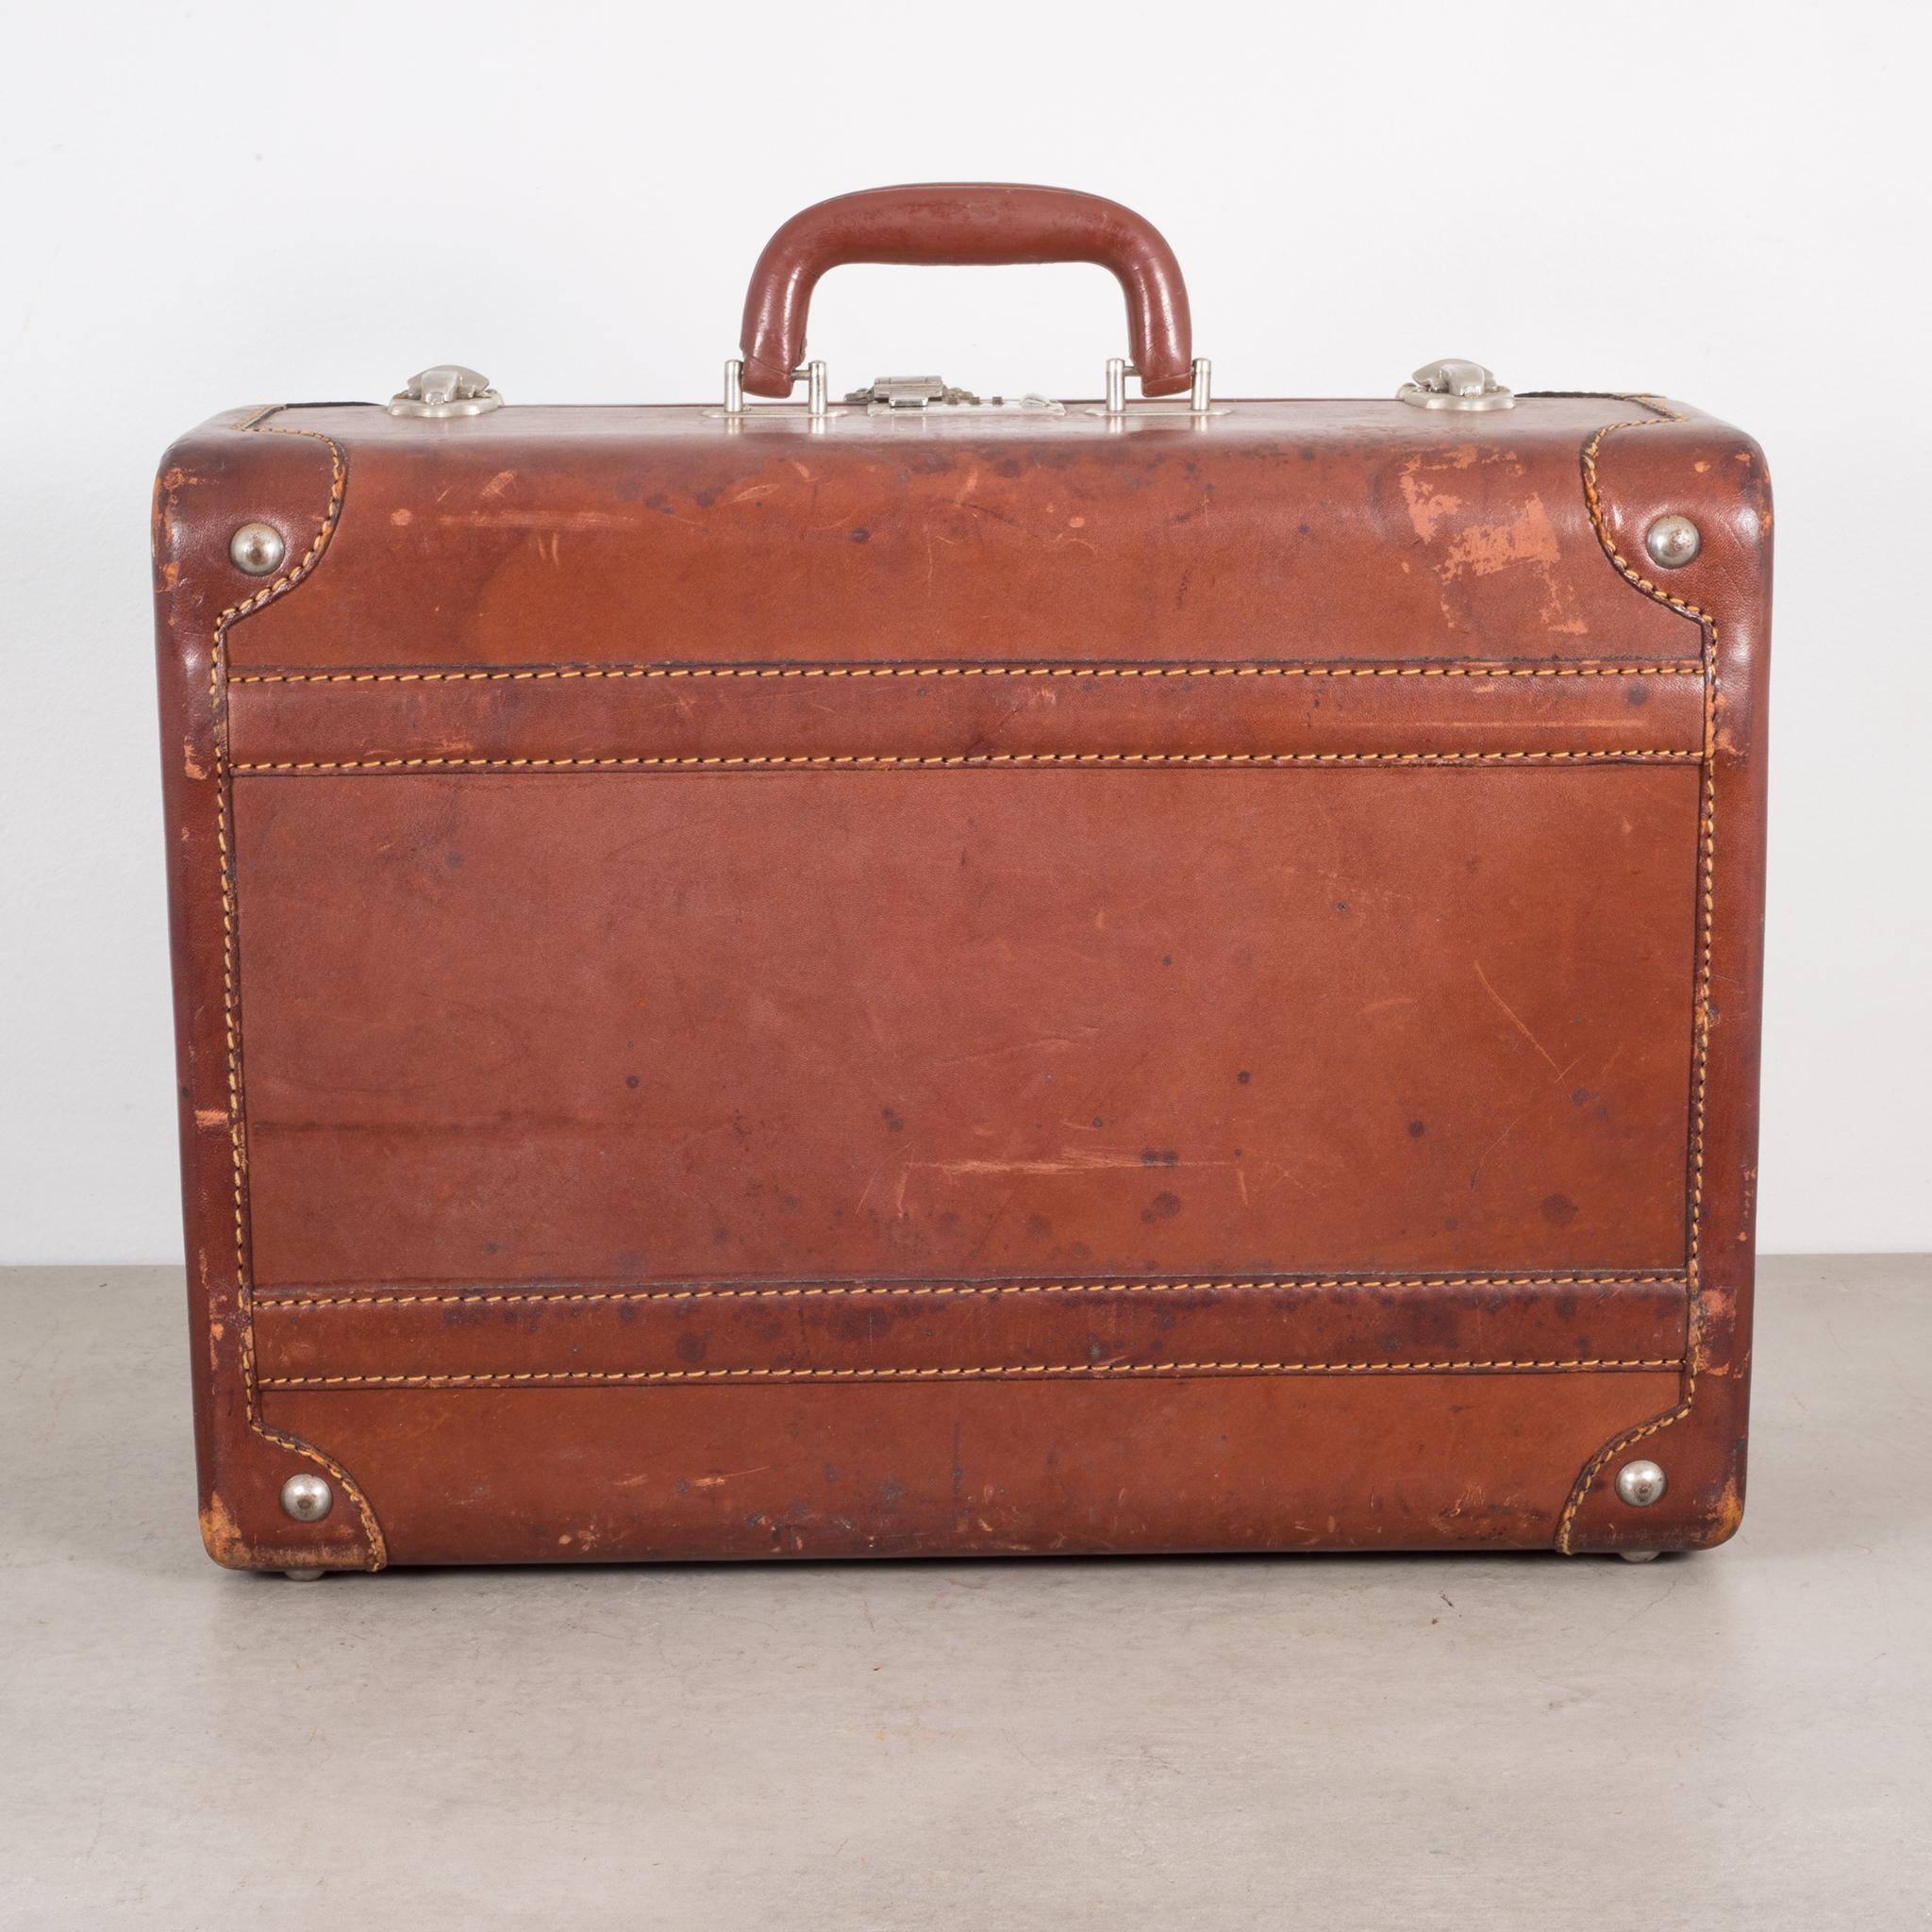 20th Century Monogrammed Small Leather Suitcase, circa 1940